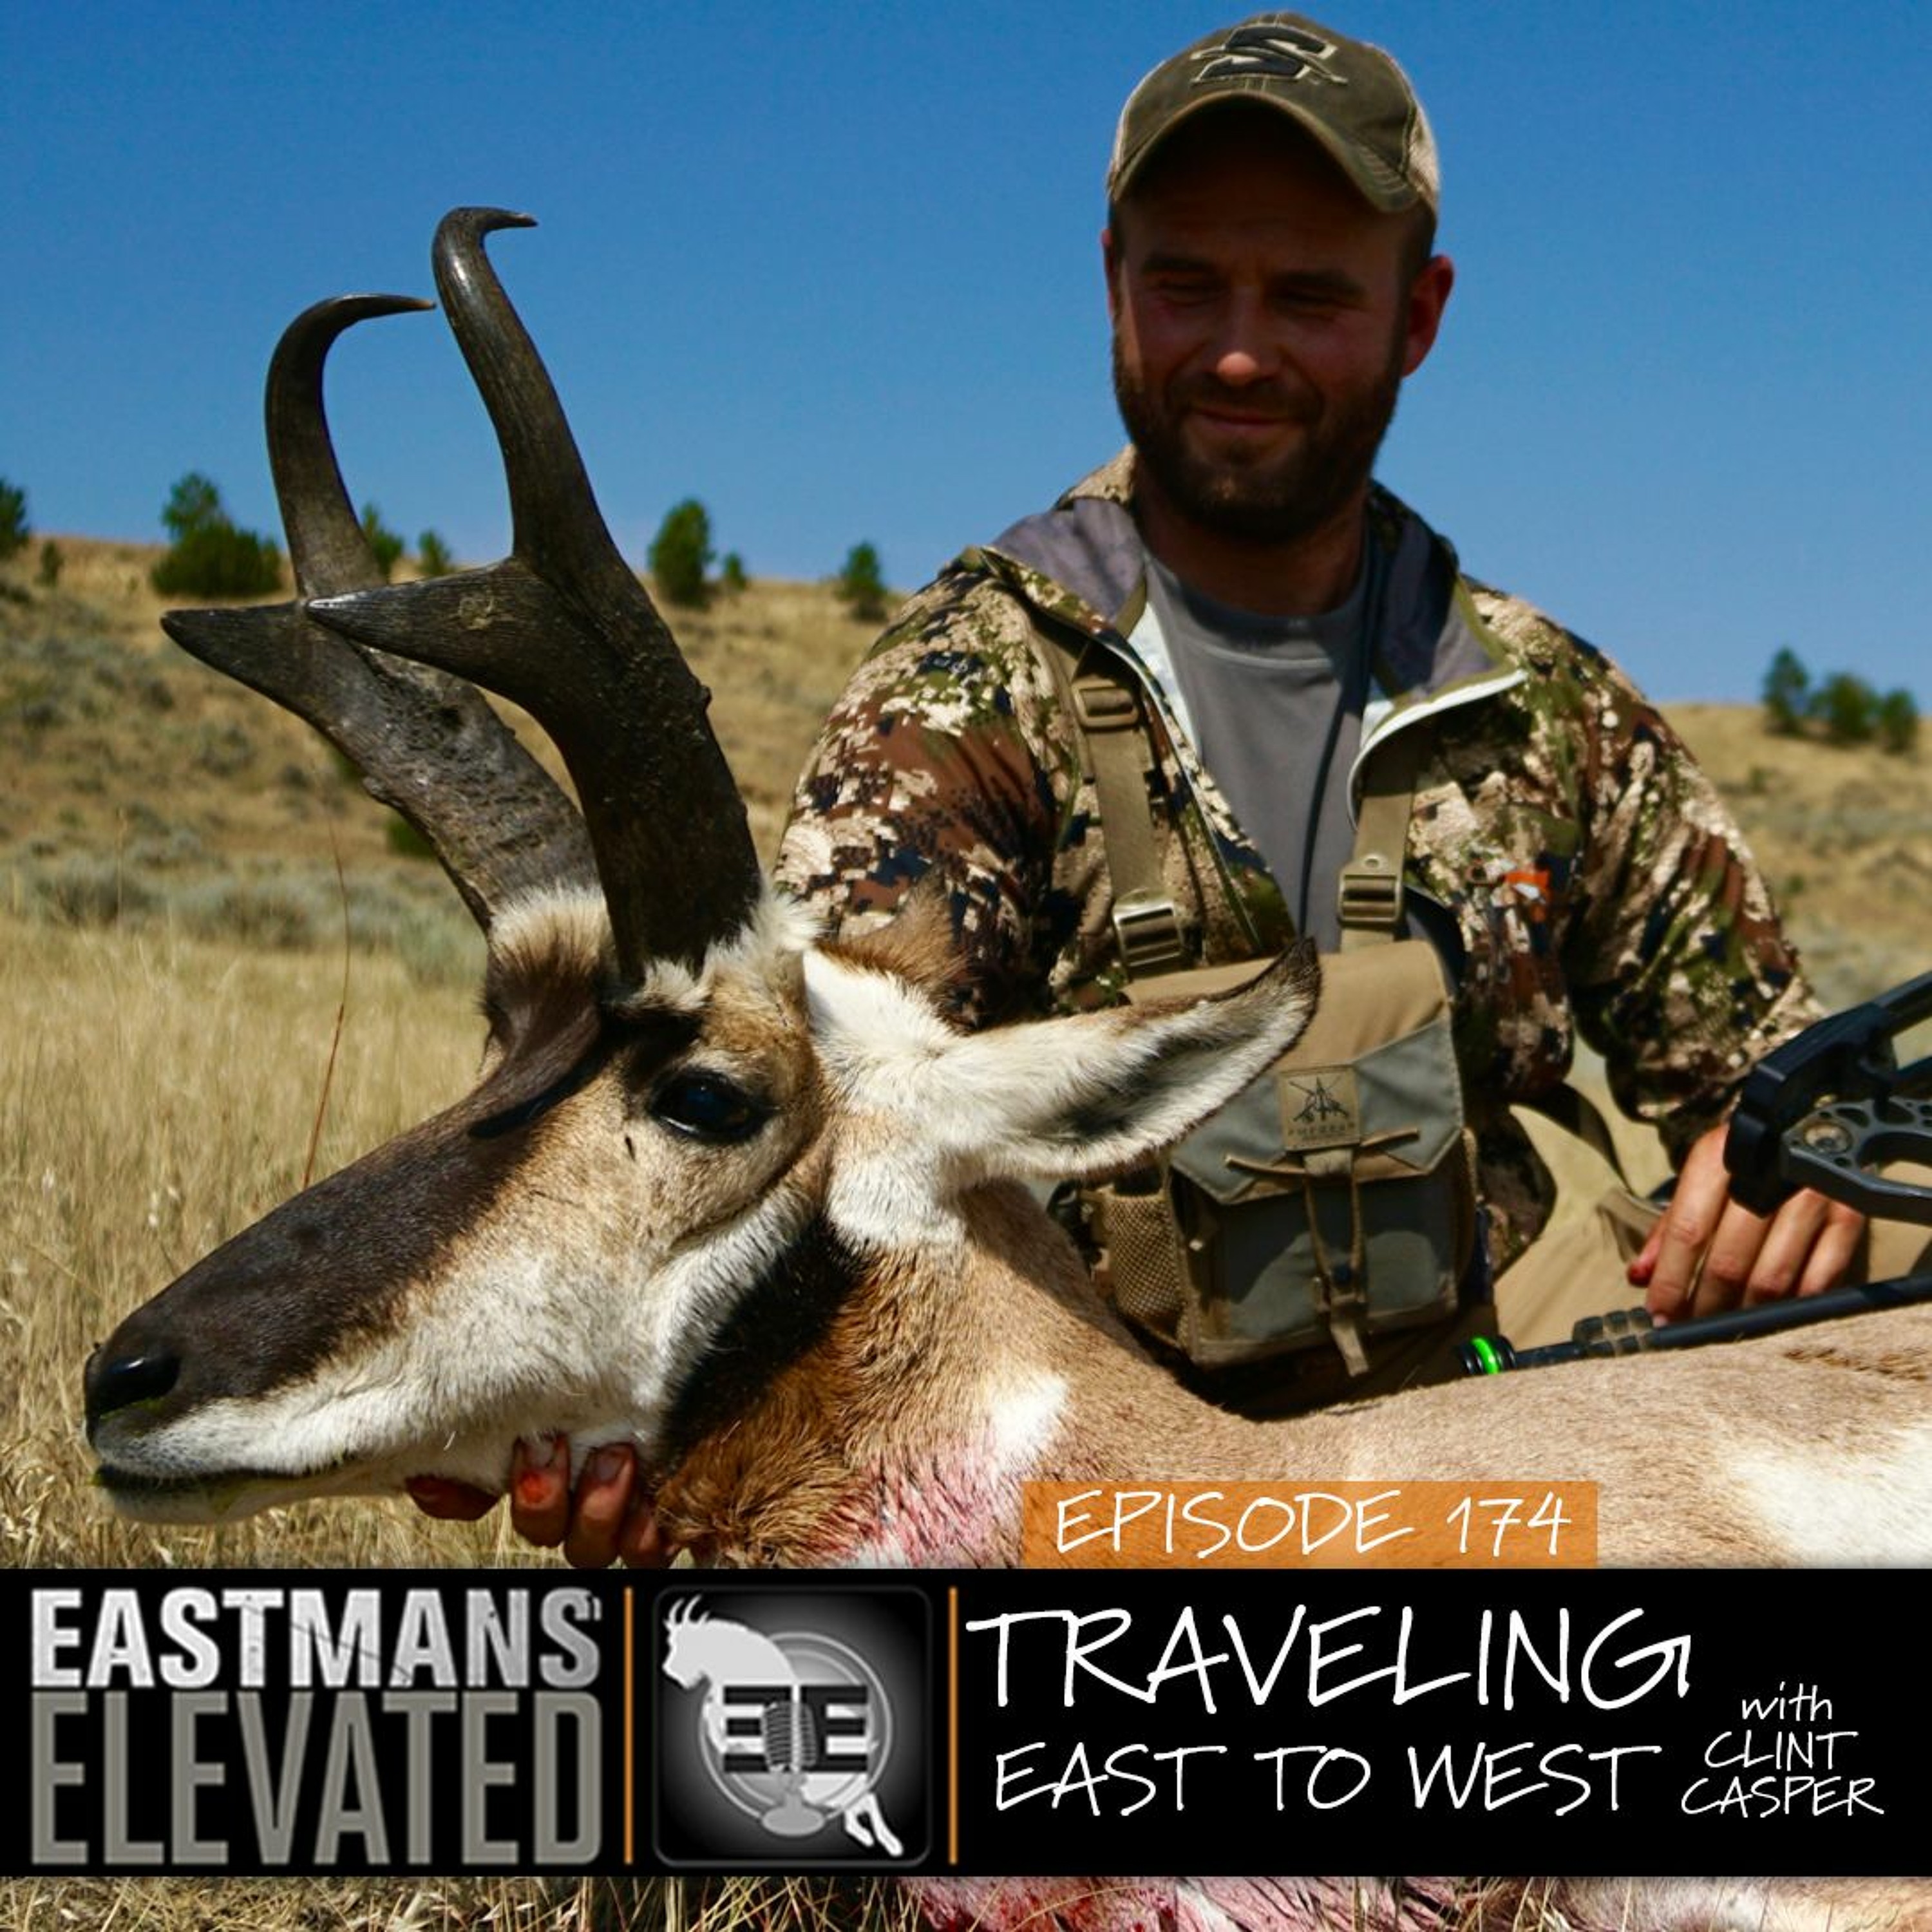 Episode 174: Traveling East to West with Clint Casper